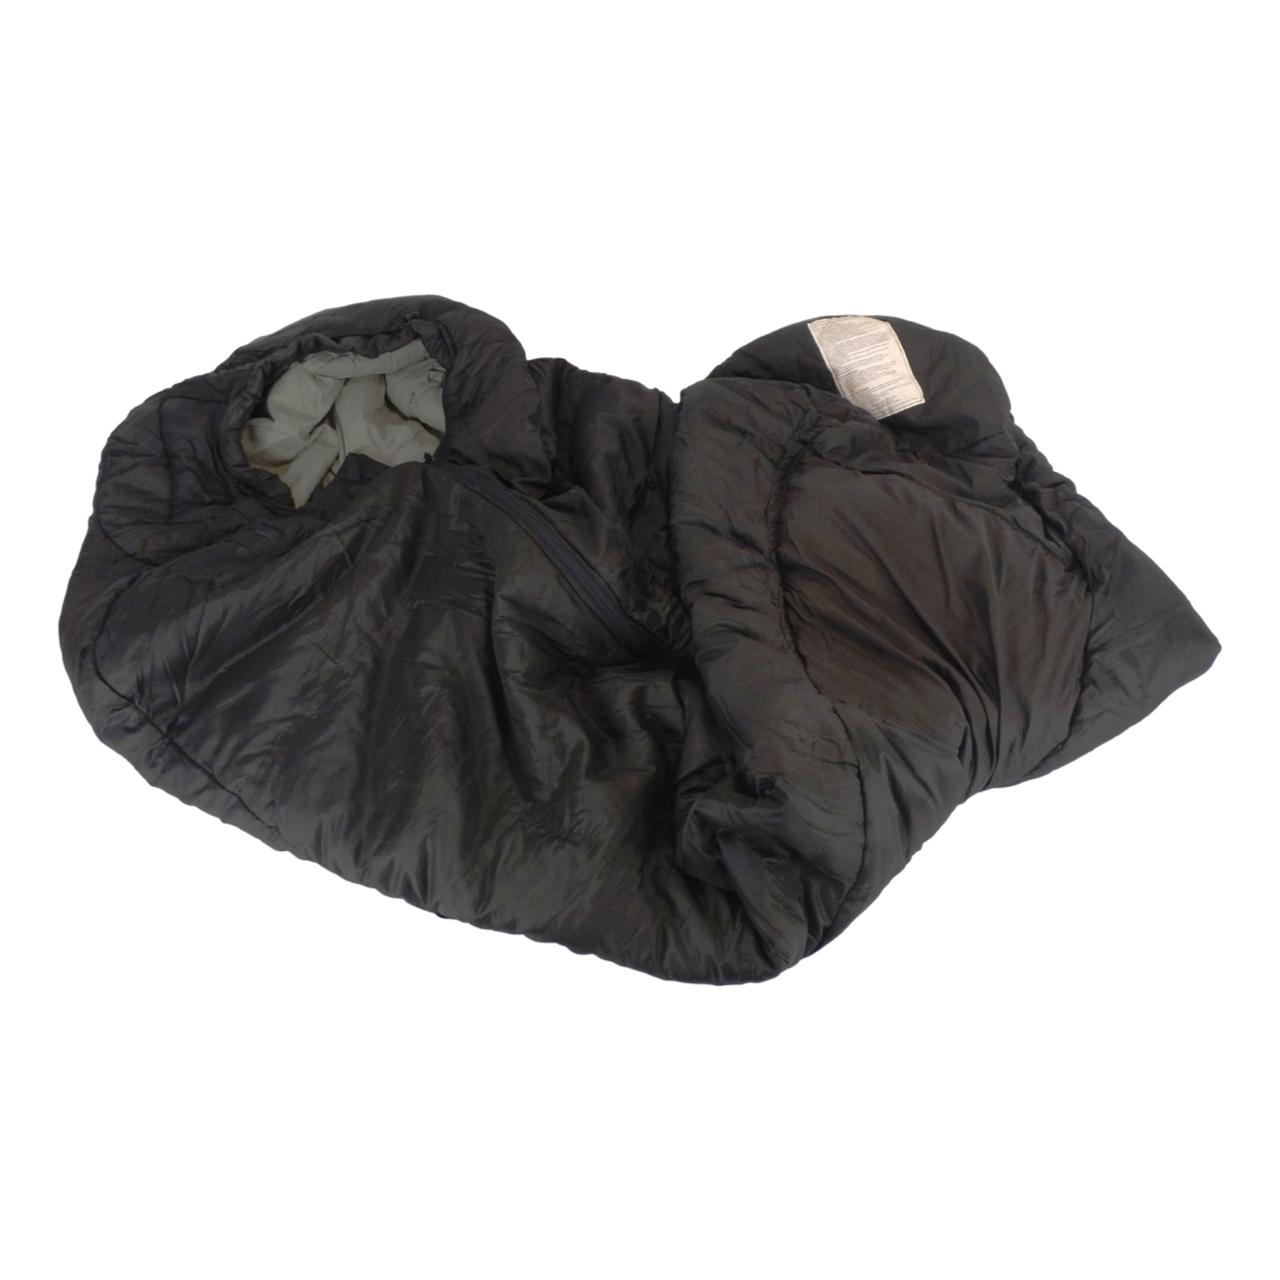 US Military Extreme Cold Weather Outer Sleeping Bag